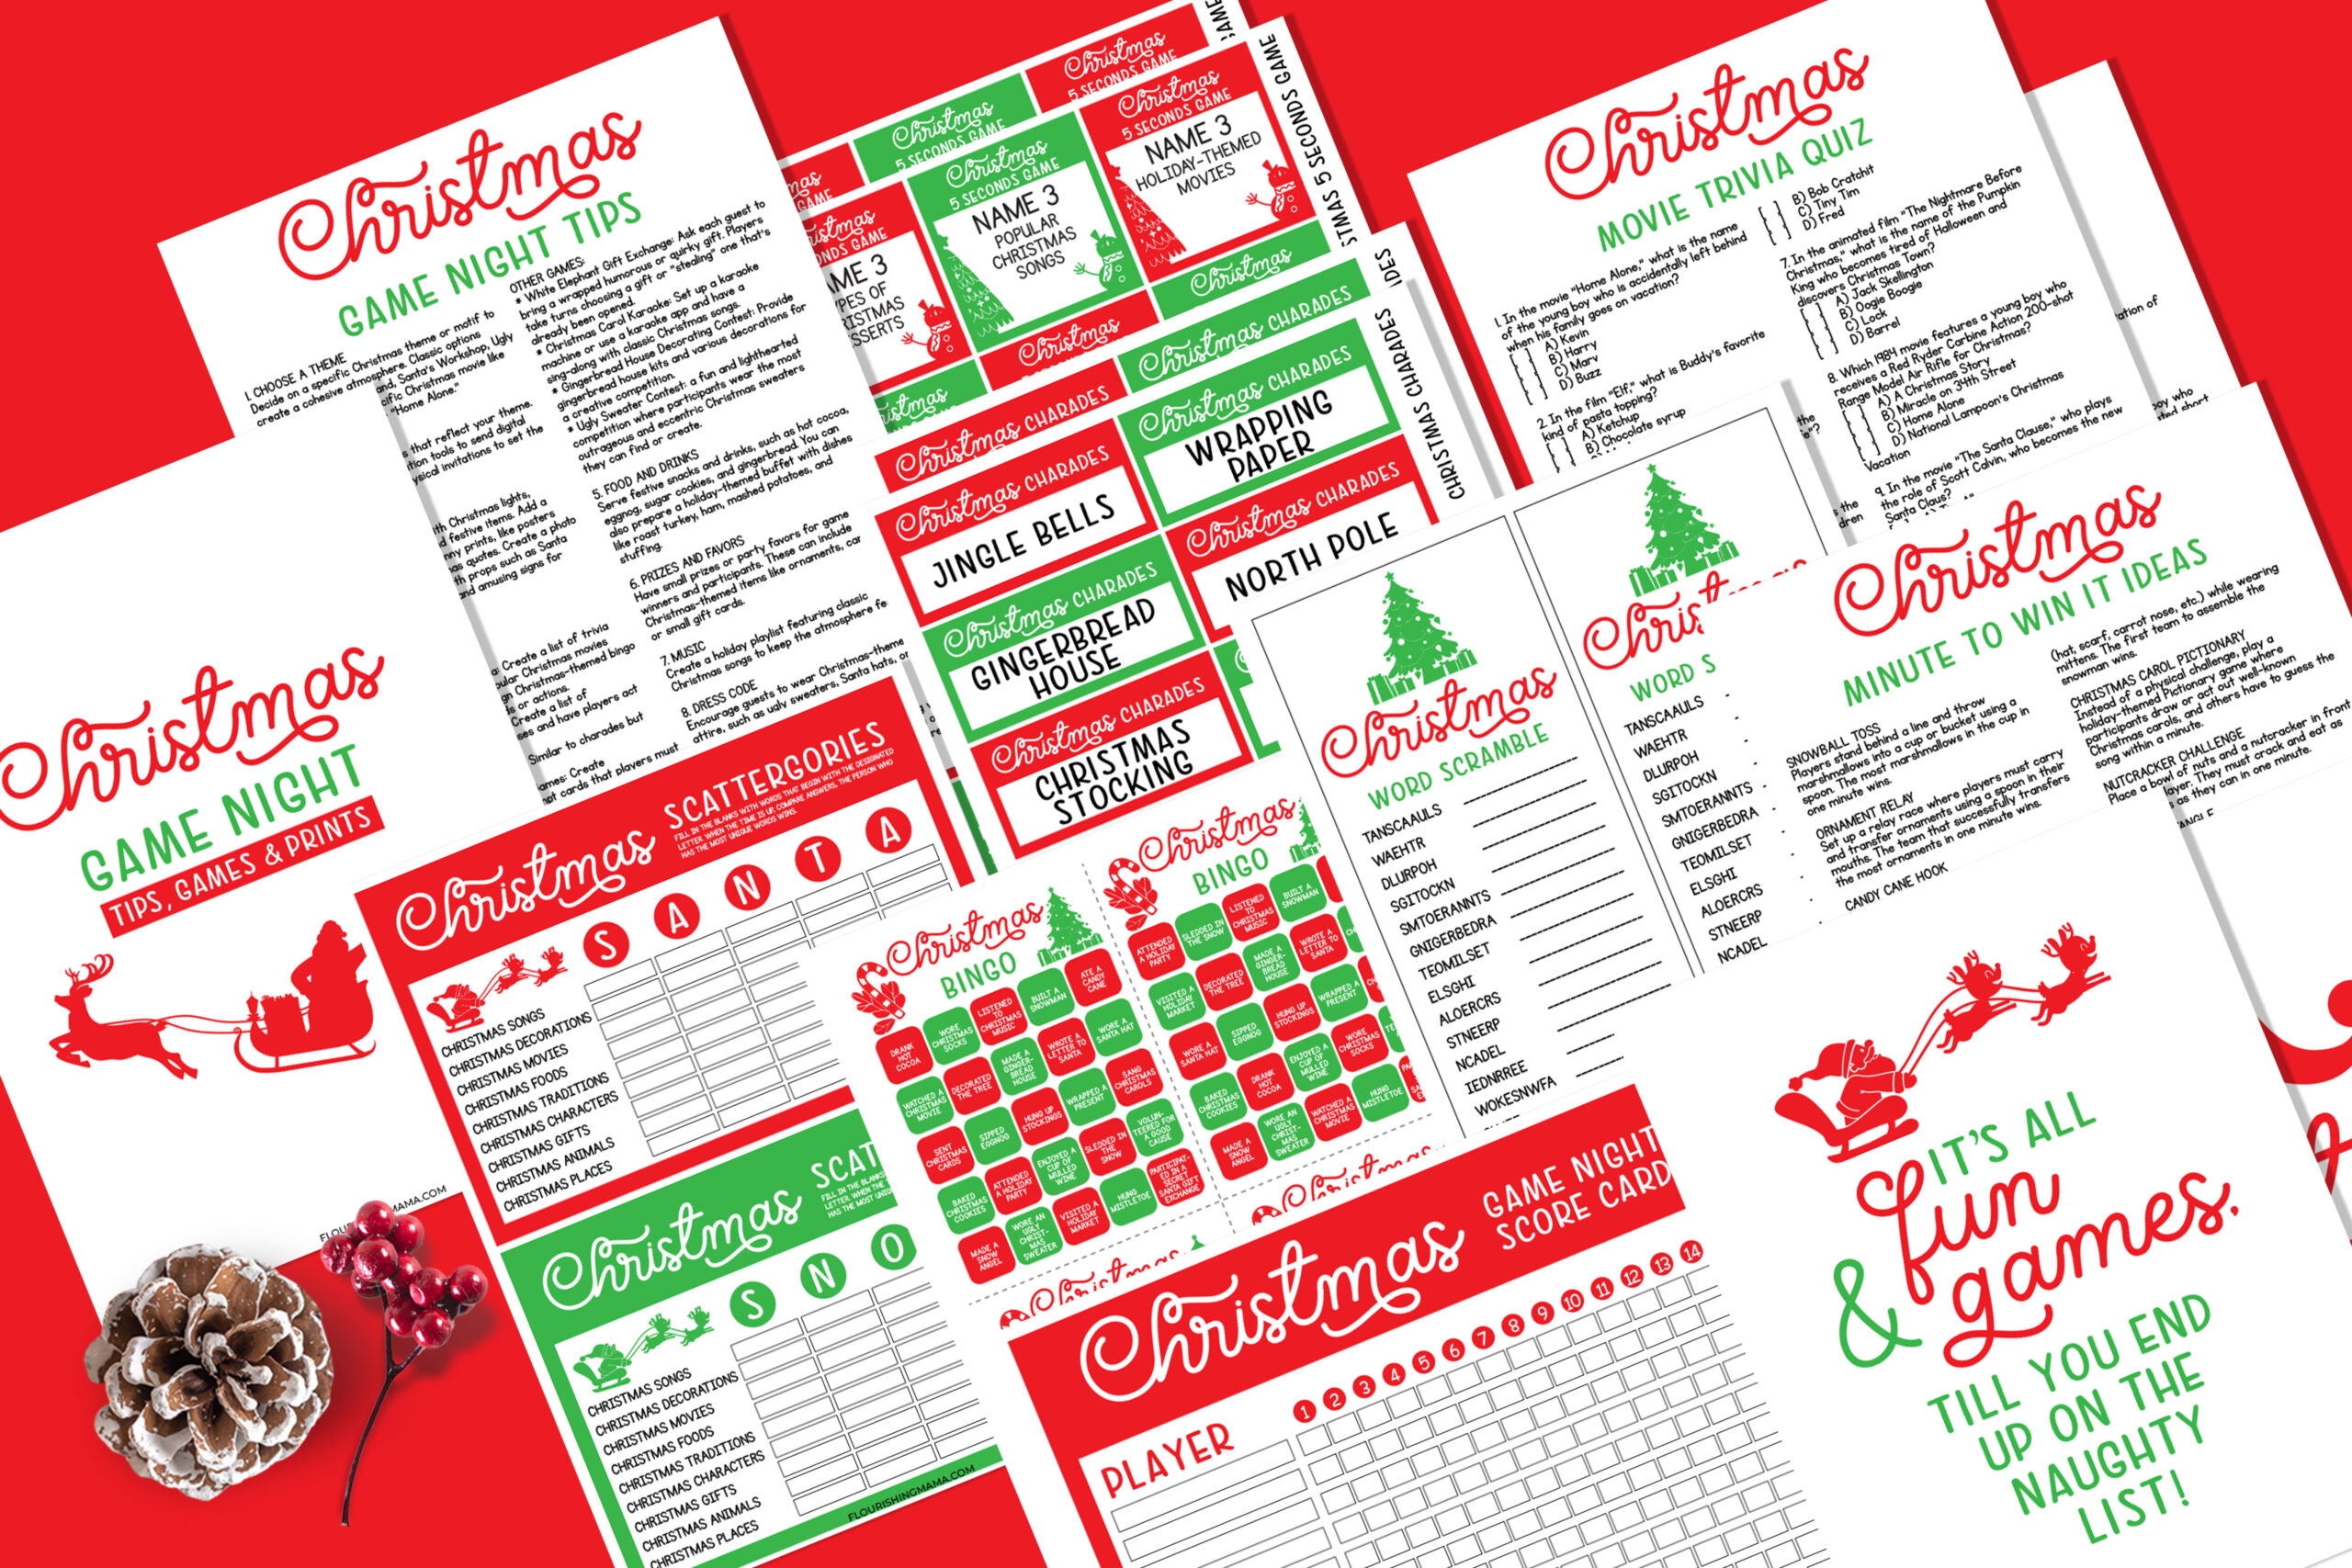 38 Fun (and Free) Christmas Games for Families